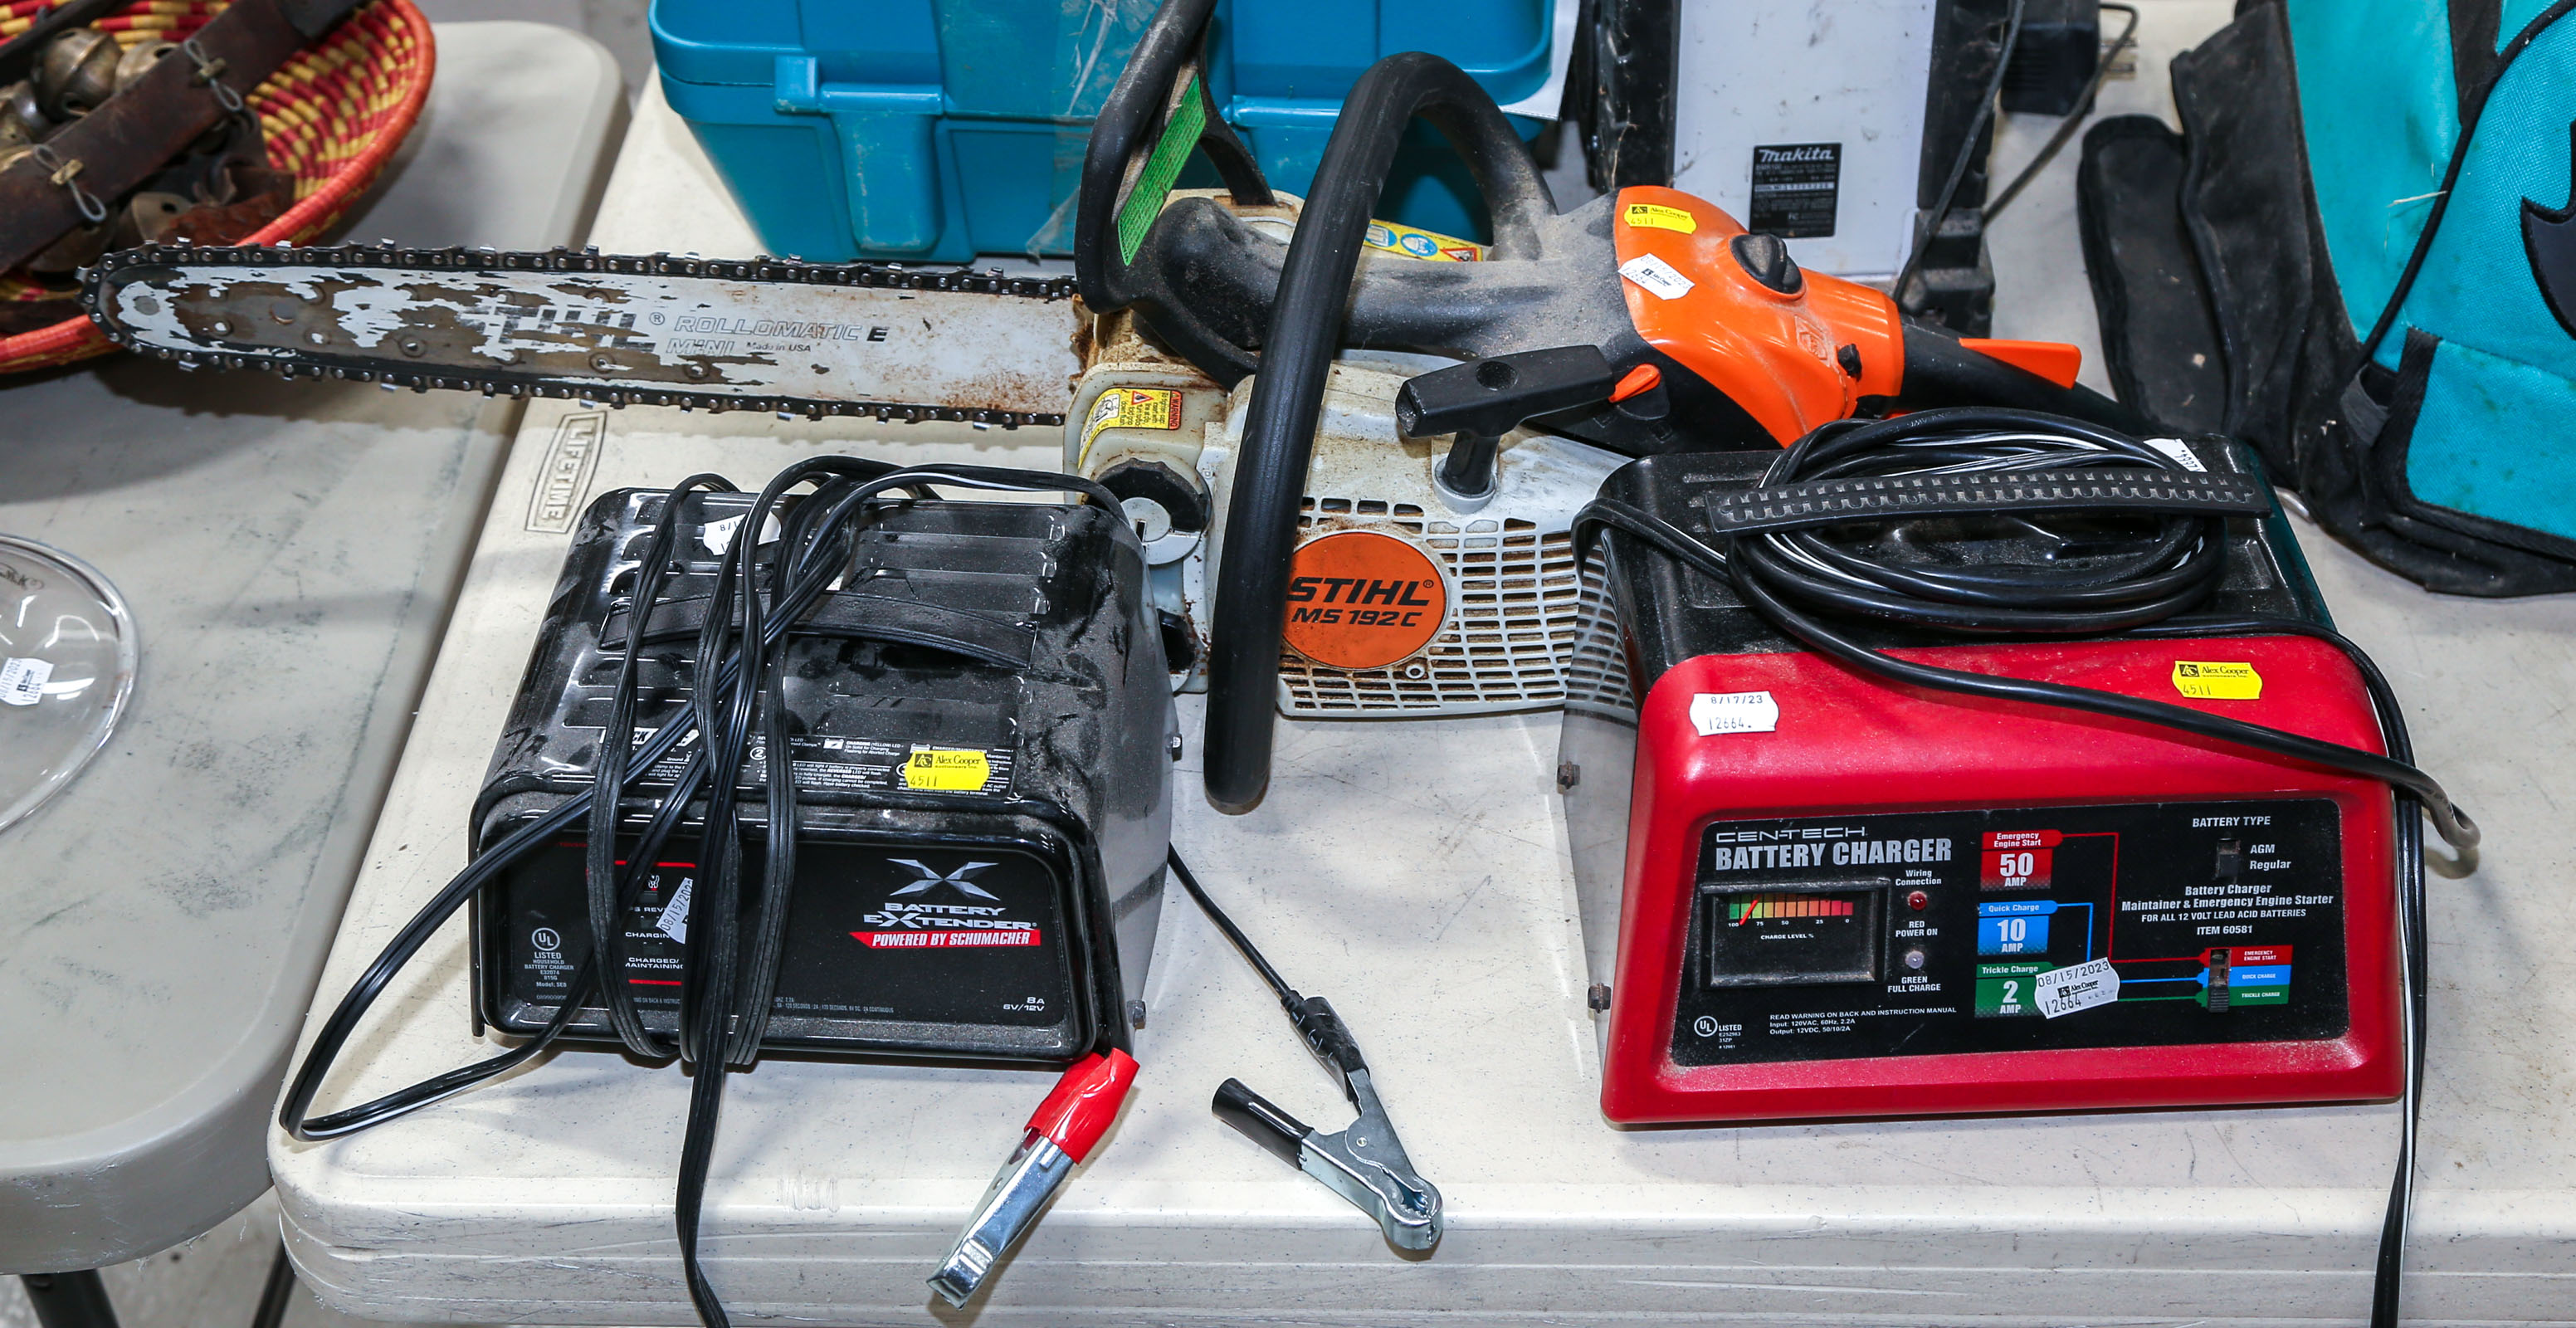 TWO BATTERY CHARGERS With a Stihl 354be2